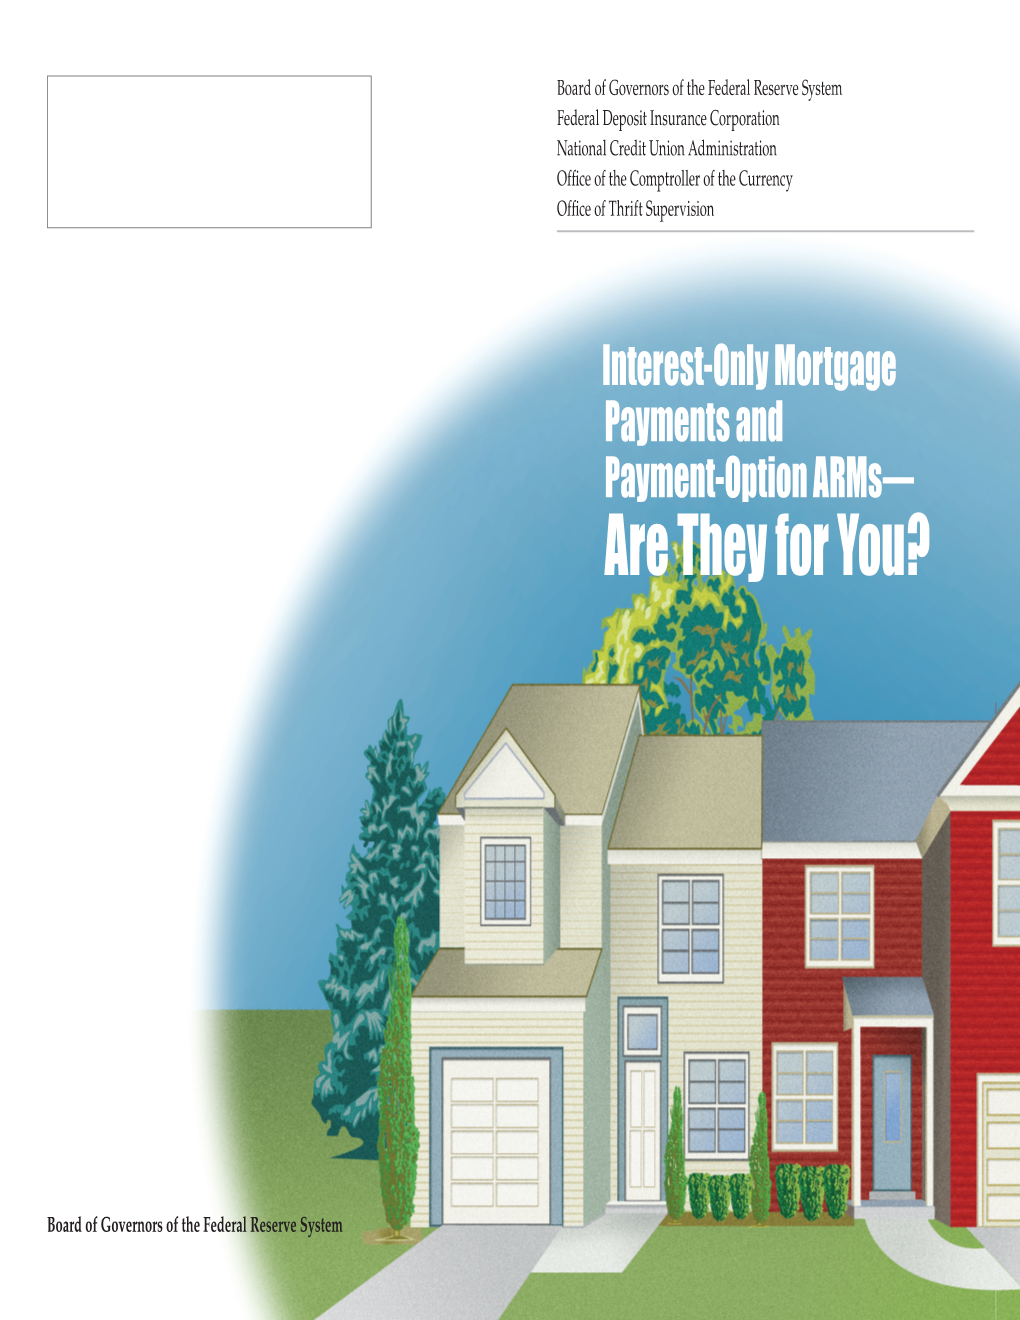 Interest-Only Mortgage Payments and Payment-Option Arms— Are They for You?